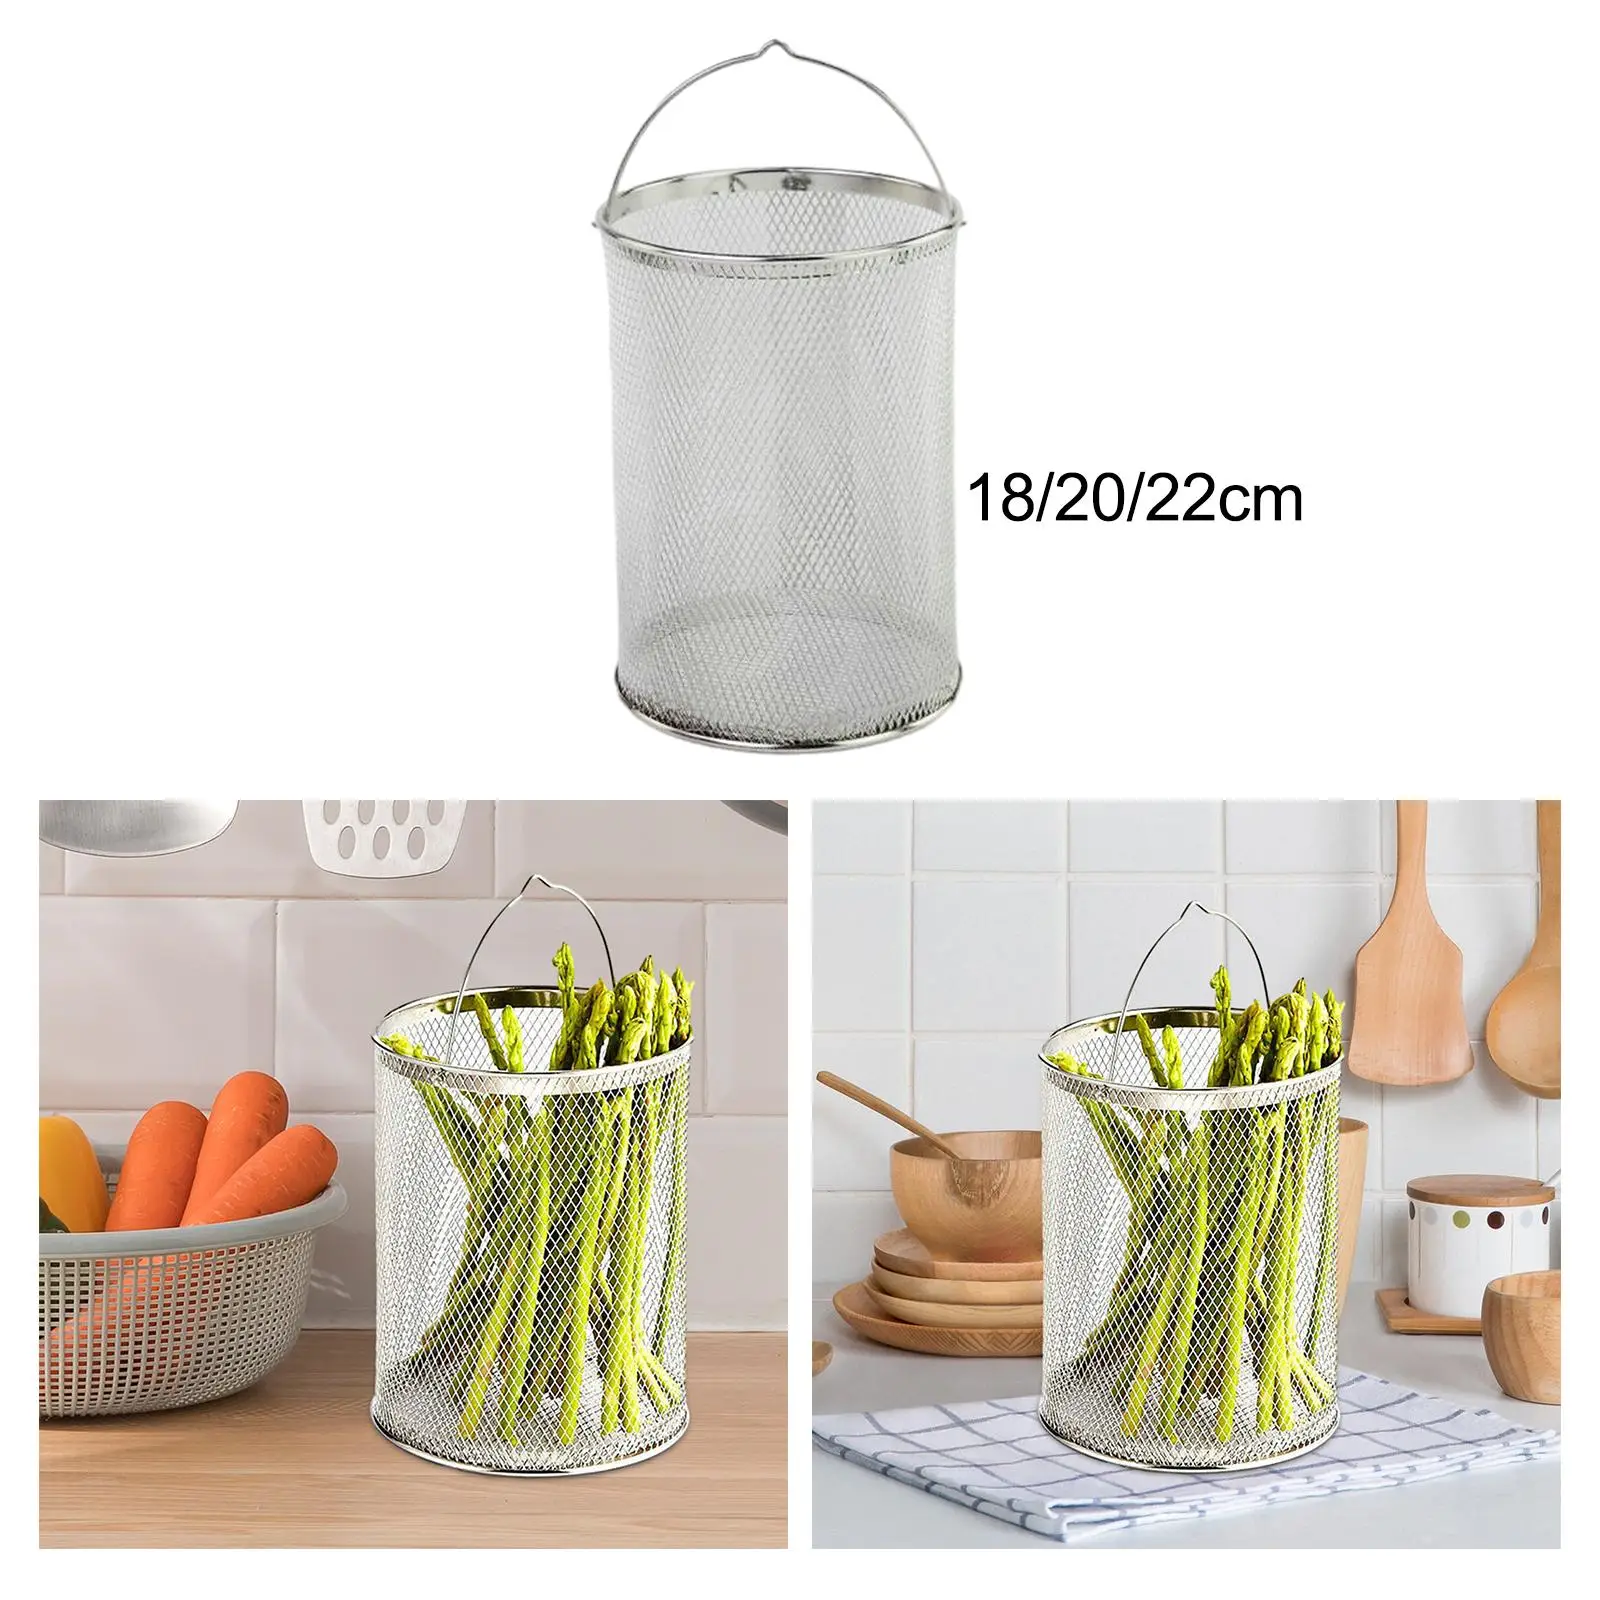 Stainless Steel Fry Basket Multifunctional Noodle Strainer Food Colander Stainless Steel Colander for Cooking Frying